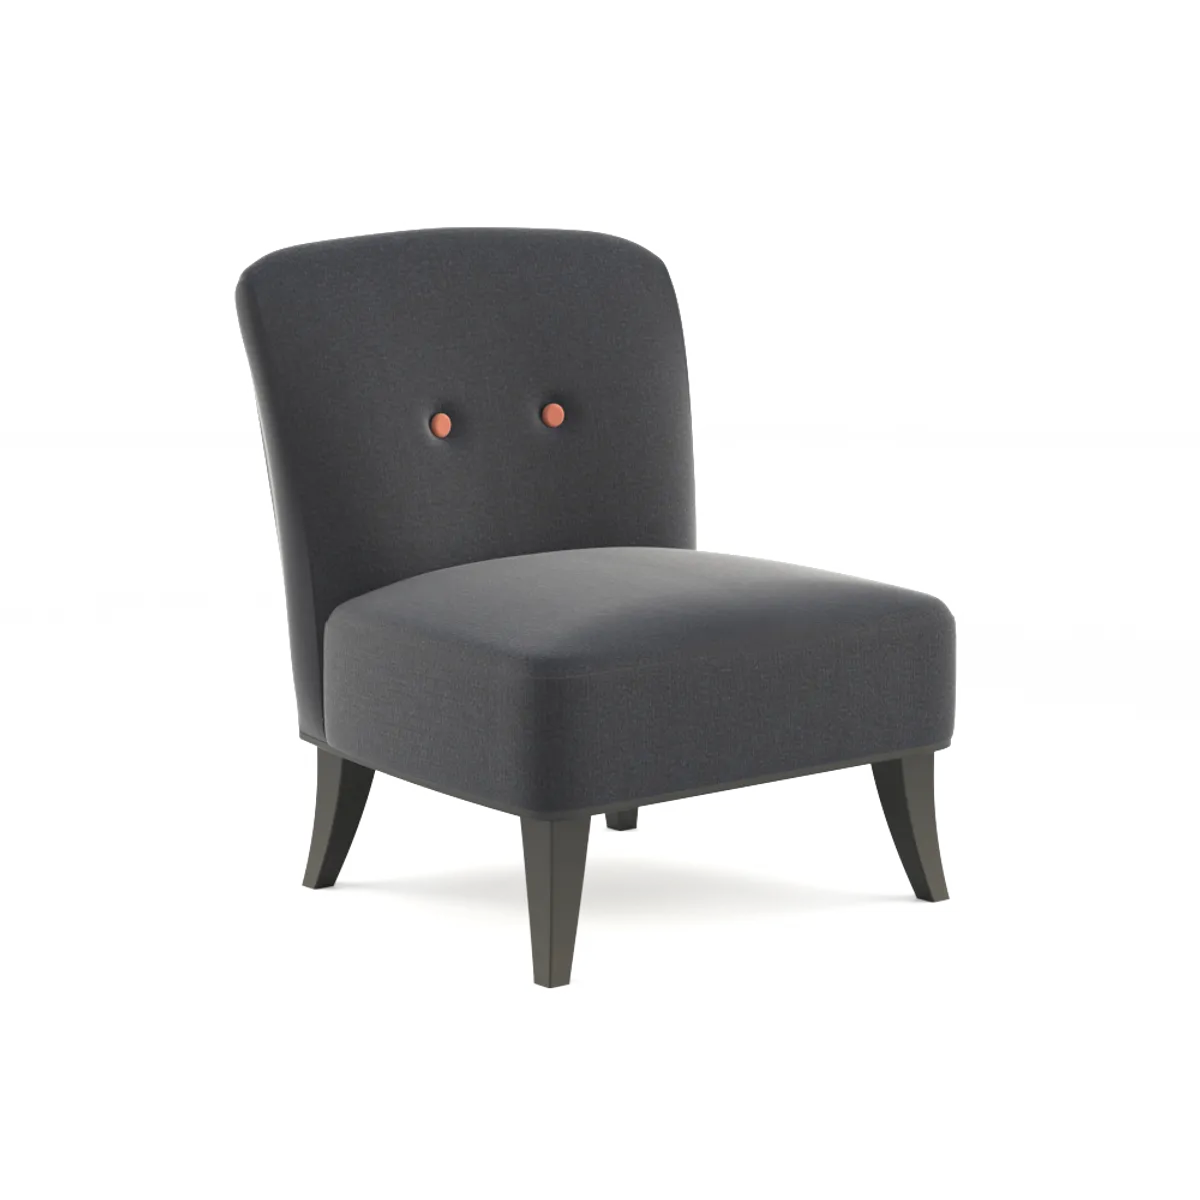 Curzon Chair Bespoke Exclusively By Inside Out Contracts